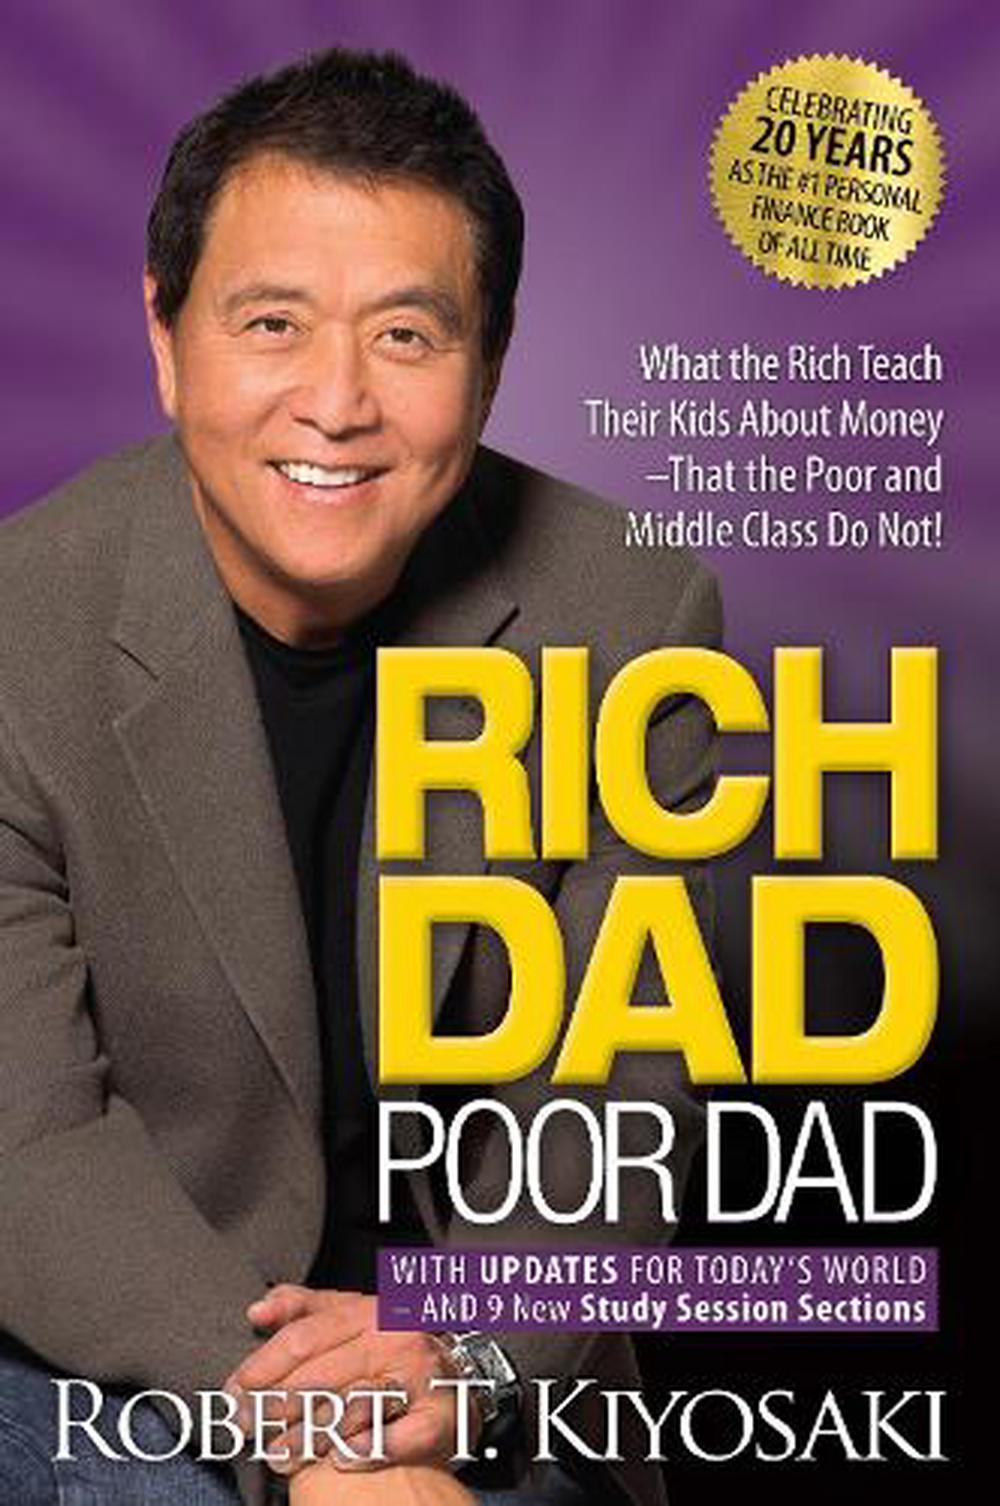 book review writing of rich dad poor dad